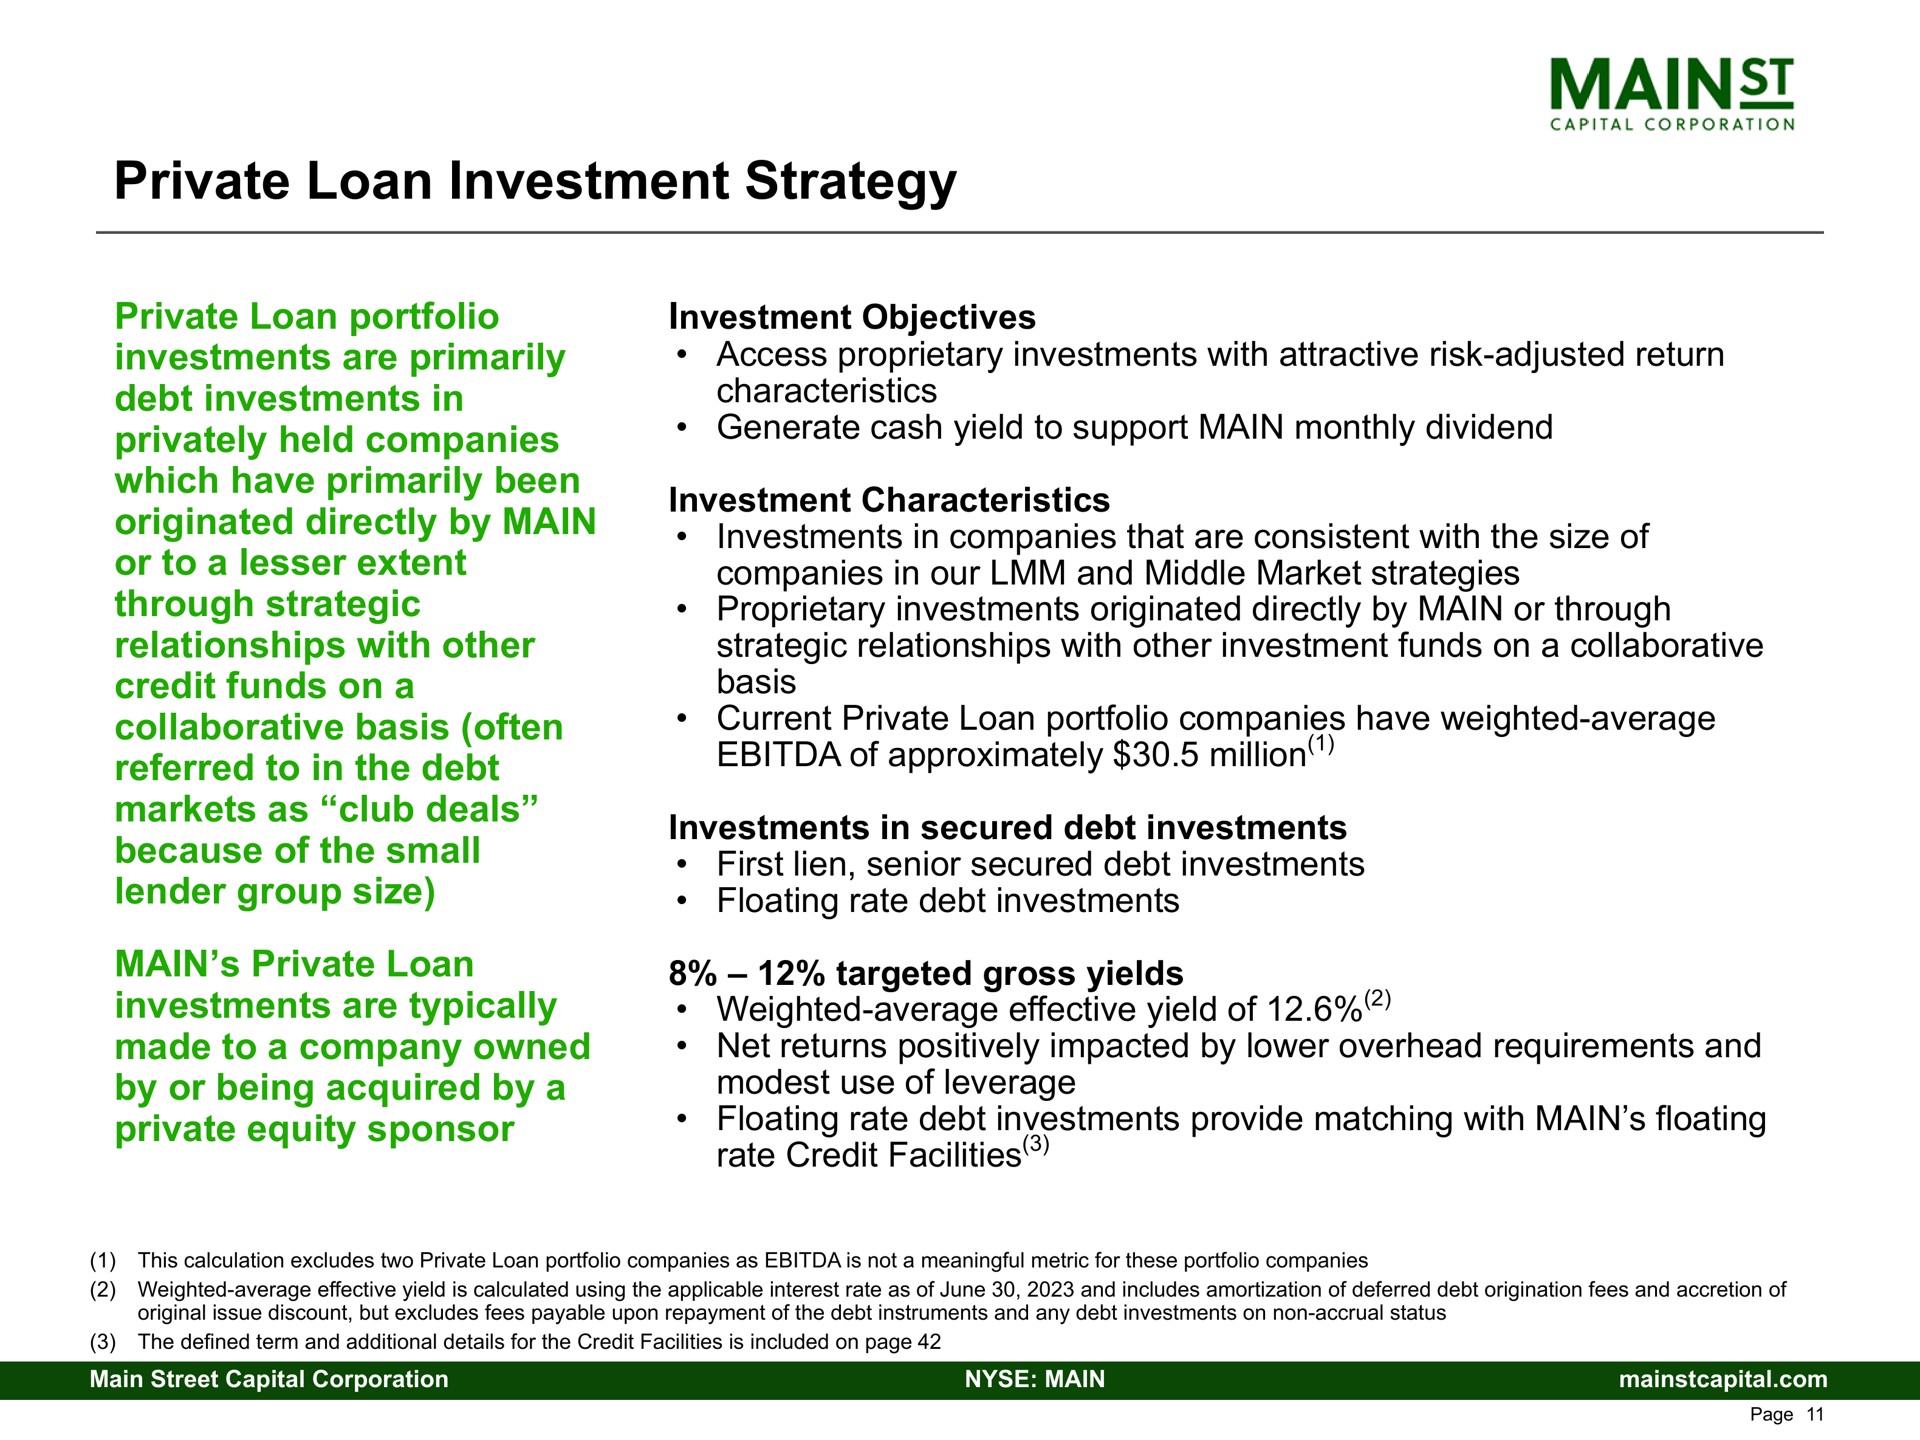 private loan investment strategy because of the small first lien senior secured debt investments | Main Street Capital